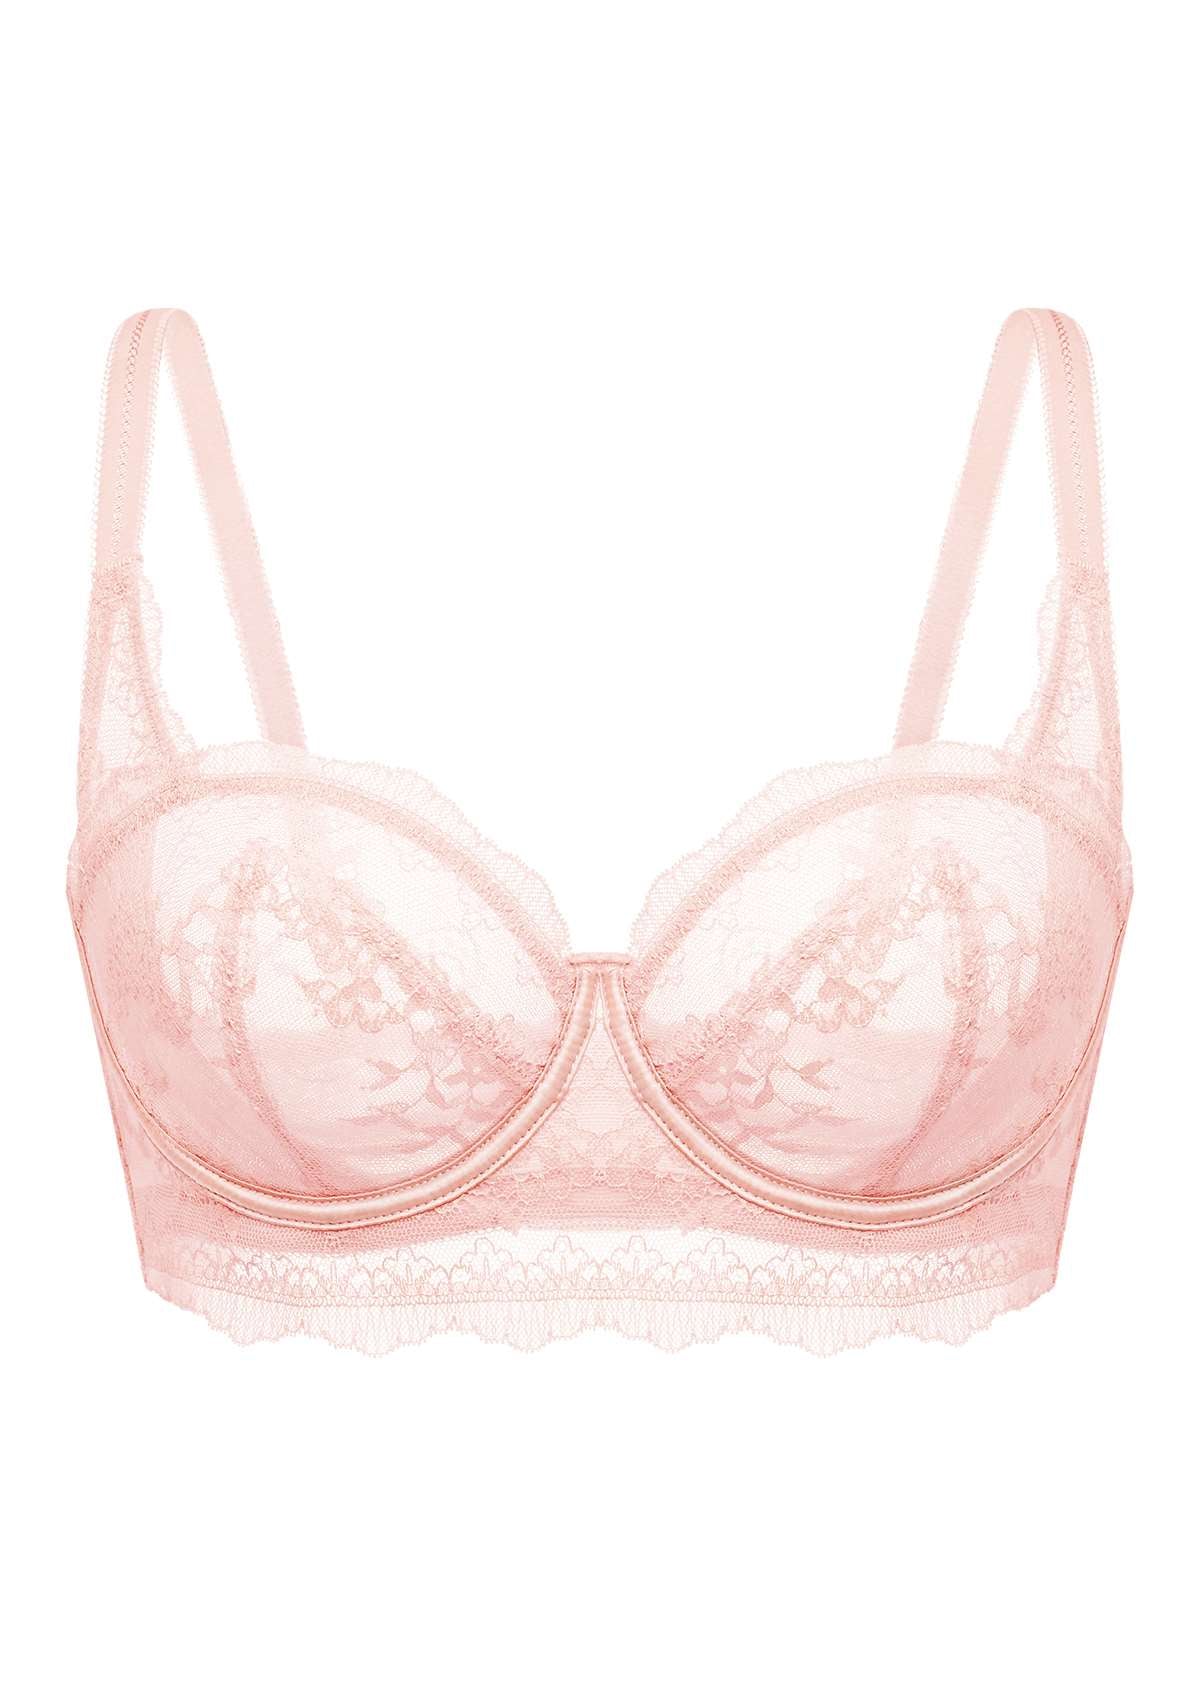 HSIA Floral Lace Unlined Bridal Balconette Delicate Bra Panty Set - Pink / 42 / DDD/F